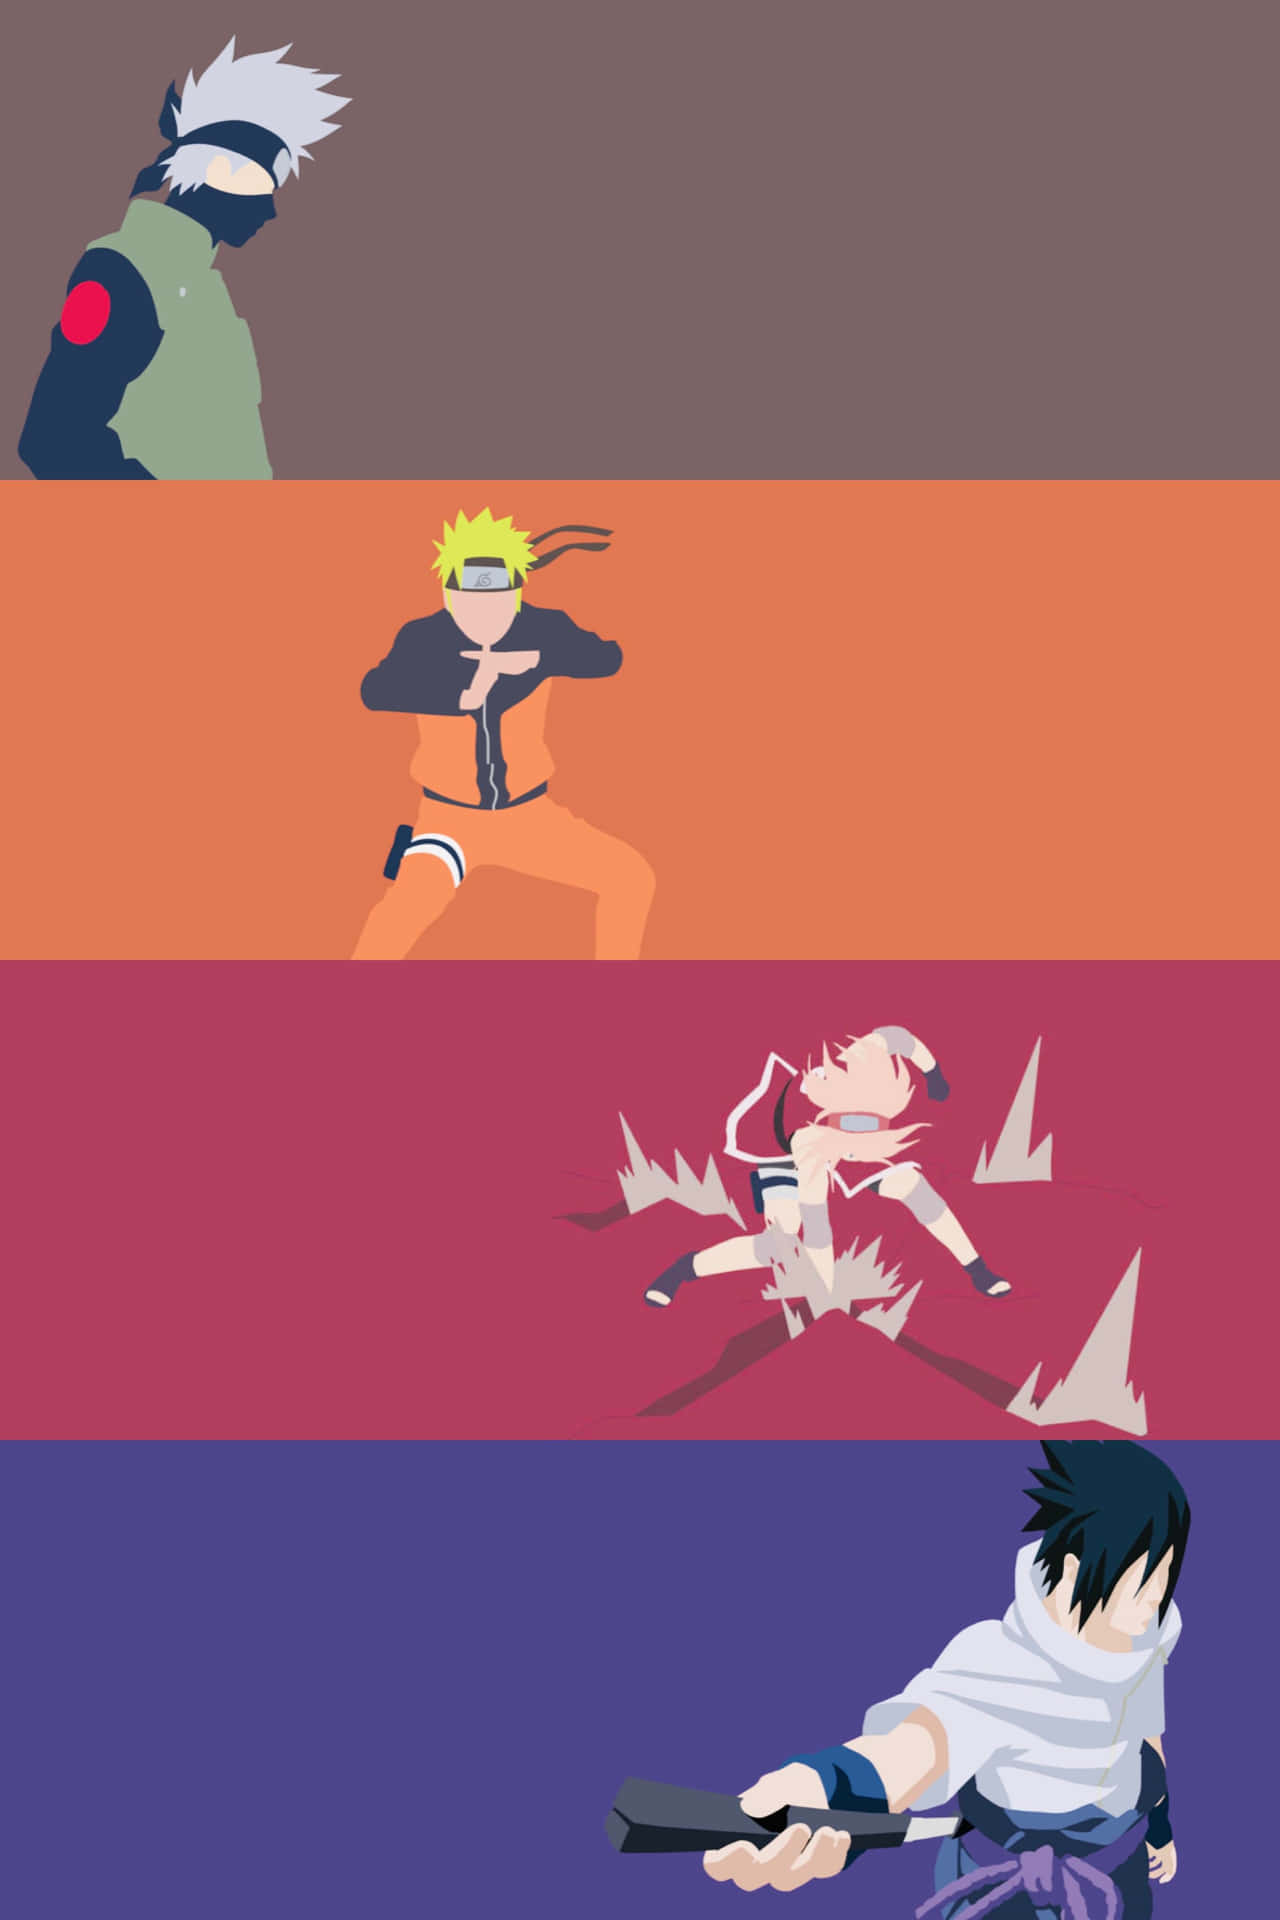 Team 7: The Tried and True Wallpaper